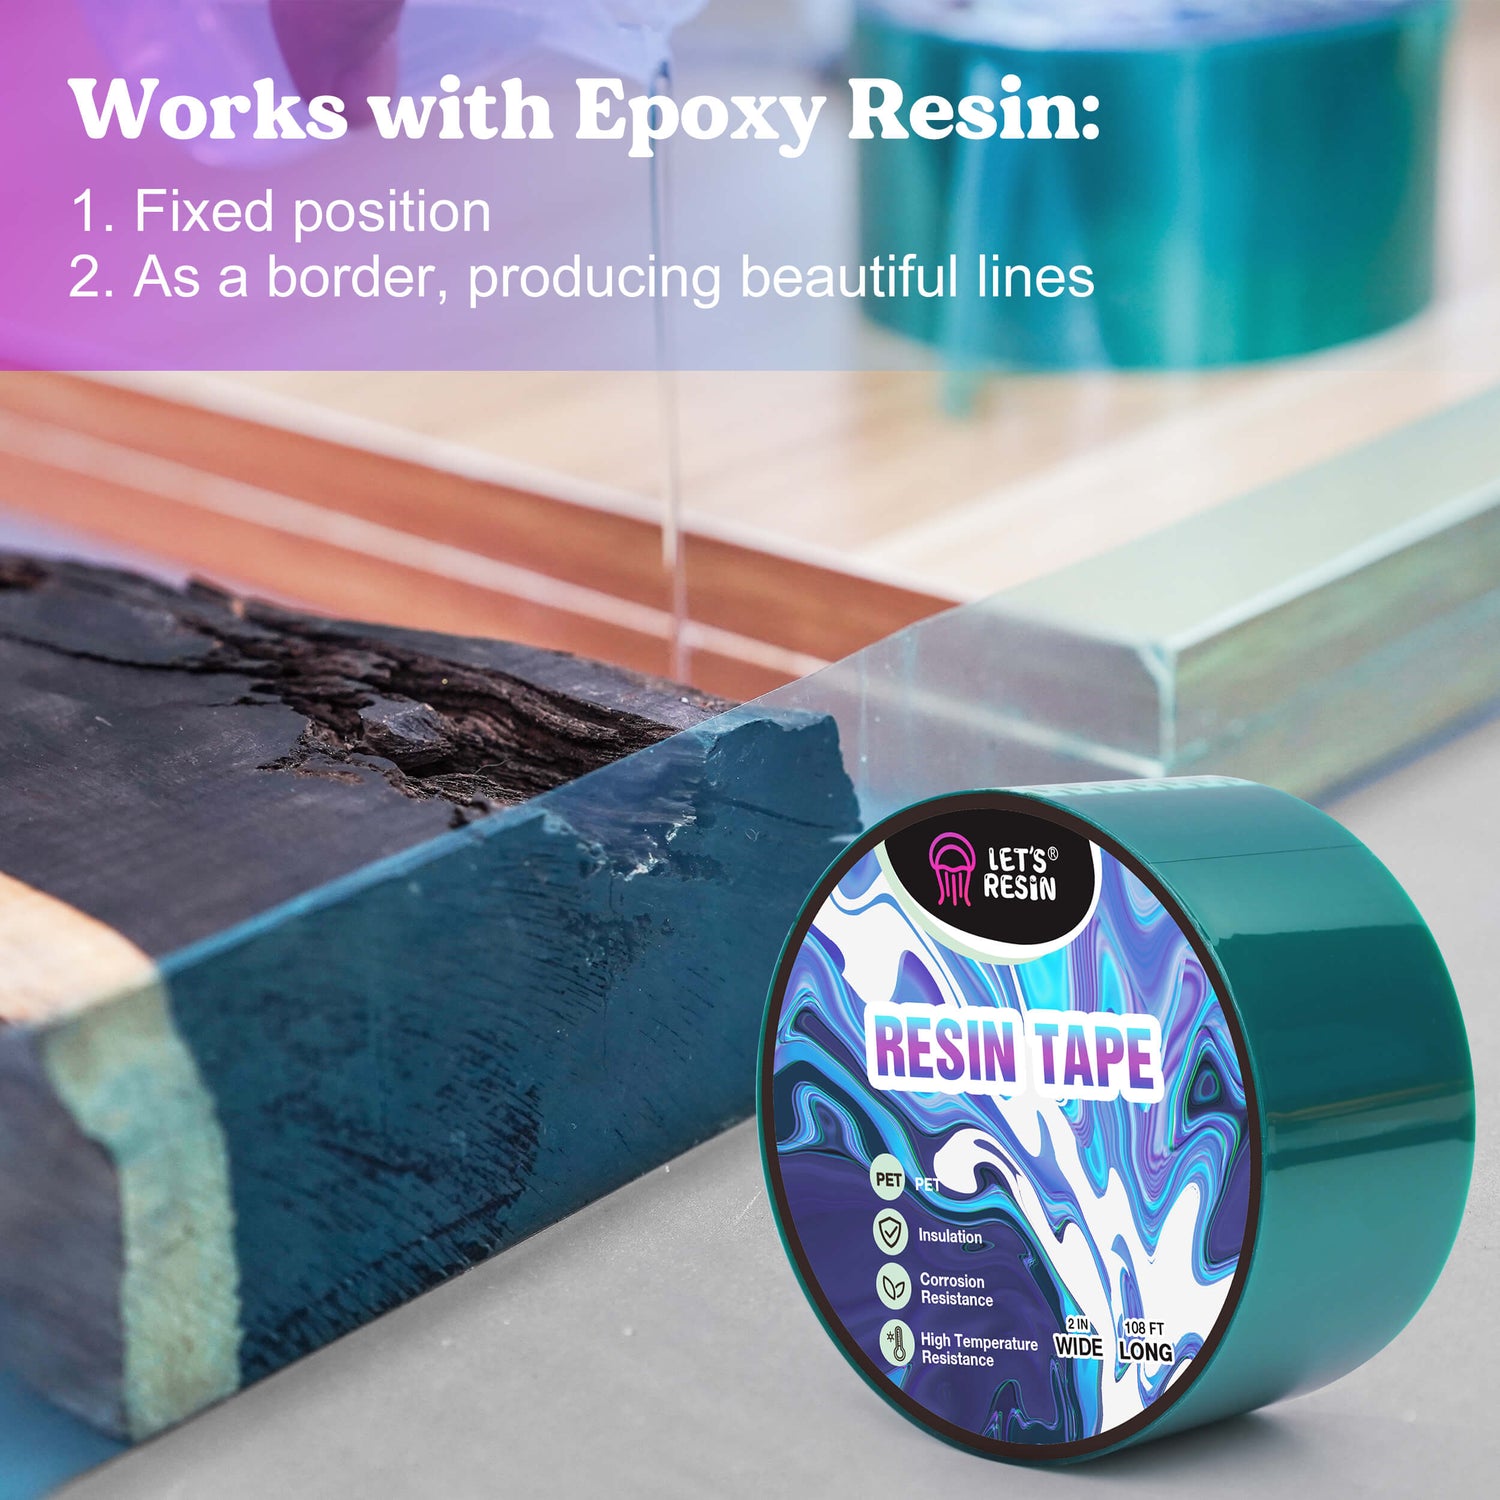 LET'S RESIN Resin Tape,2Inch Wide x 108FT Long Epoxy Tape, Thermal